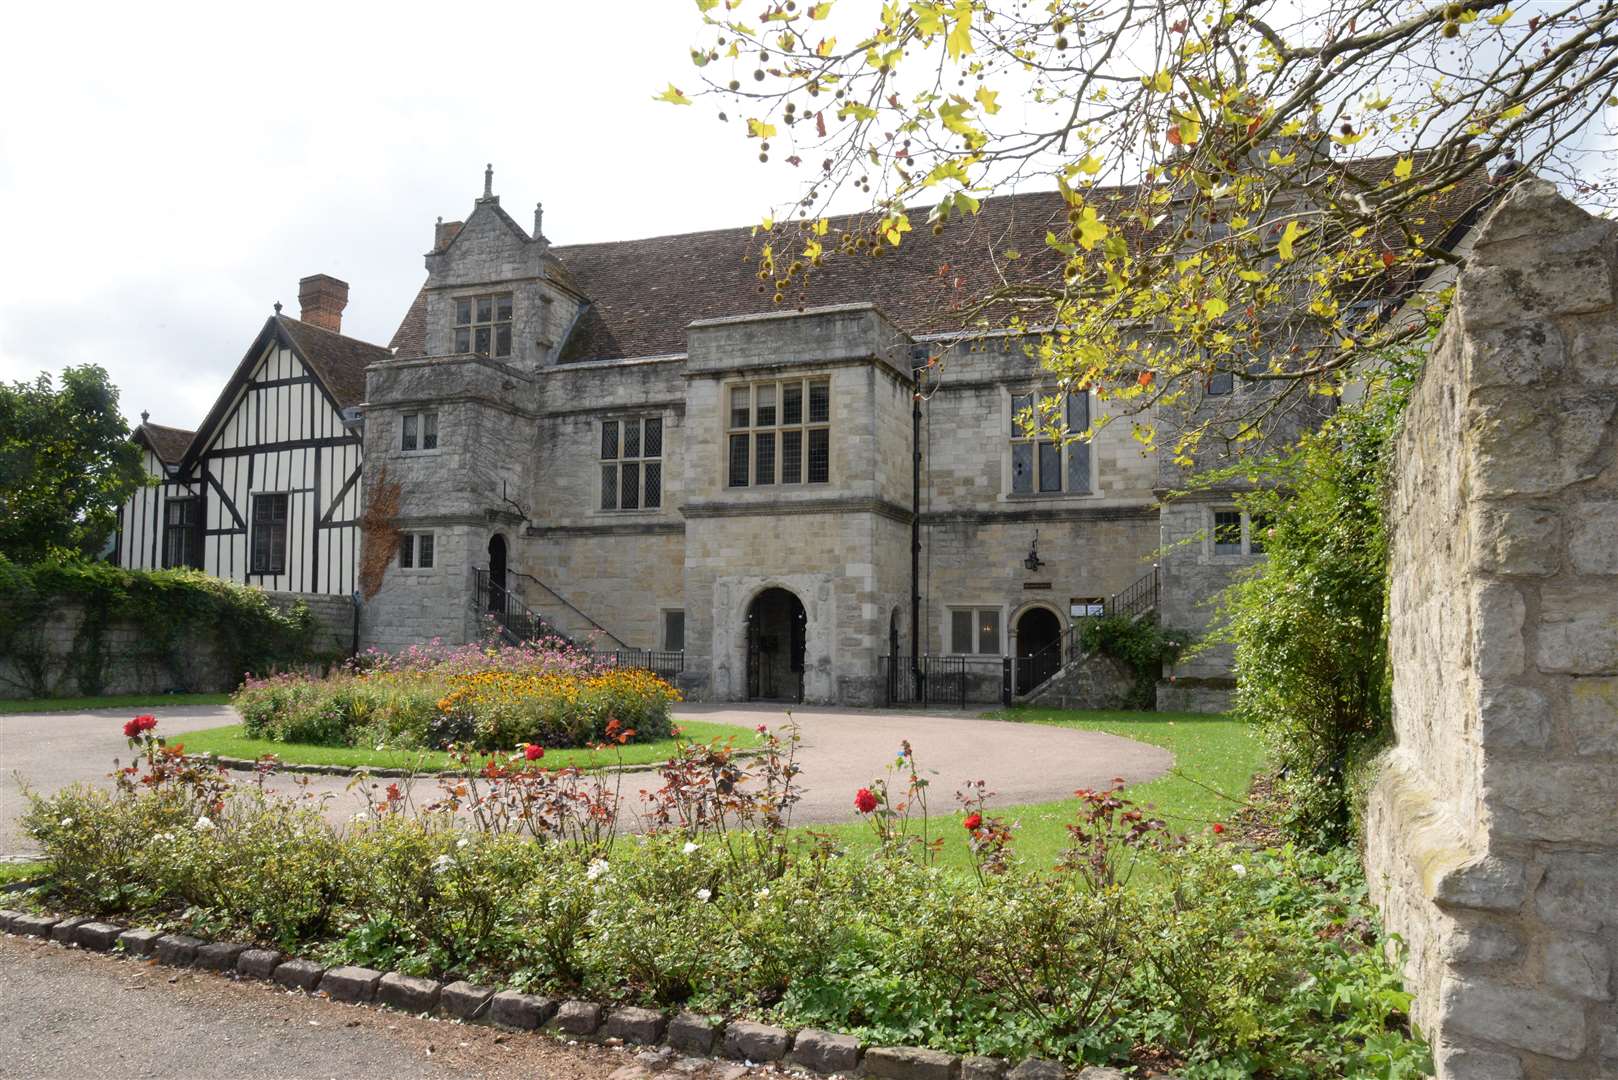 The Archbishop's Palace in Mill Street, Maidstone, where the inquest was heard. Picture: Chris Davey